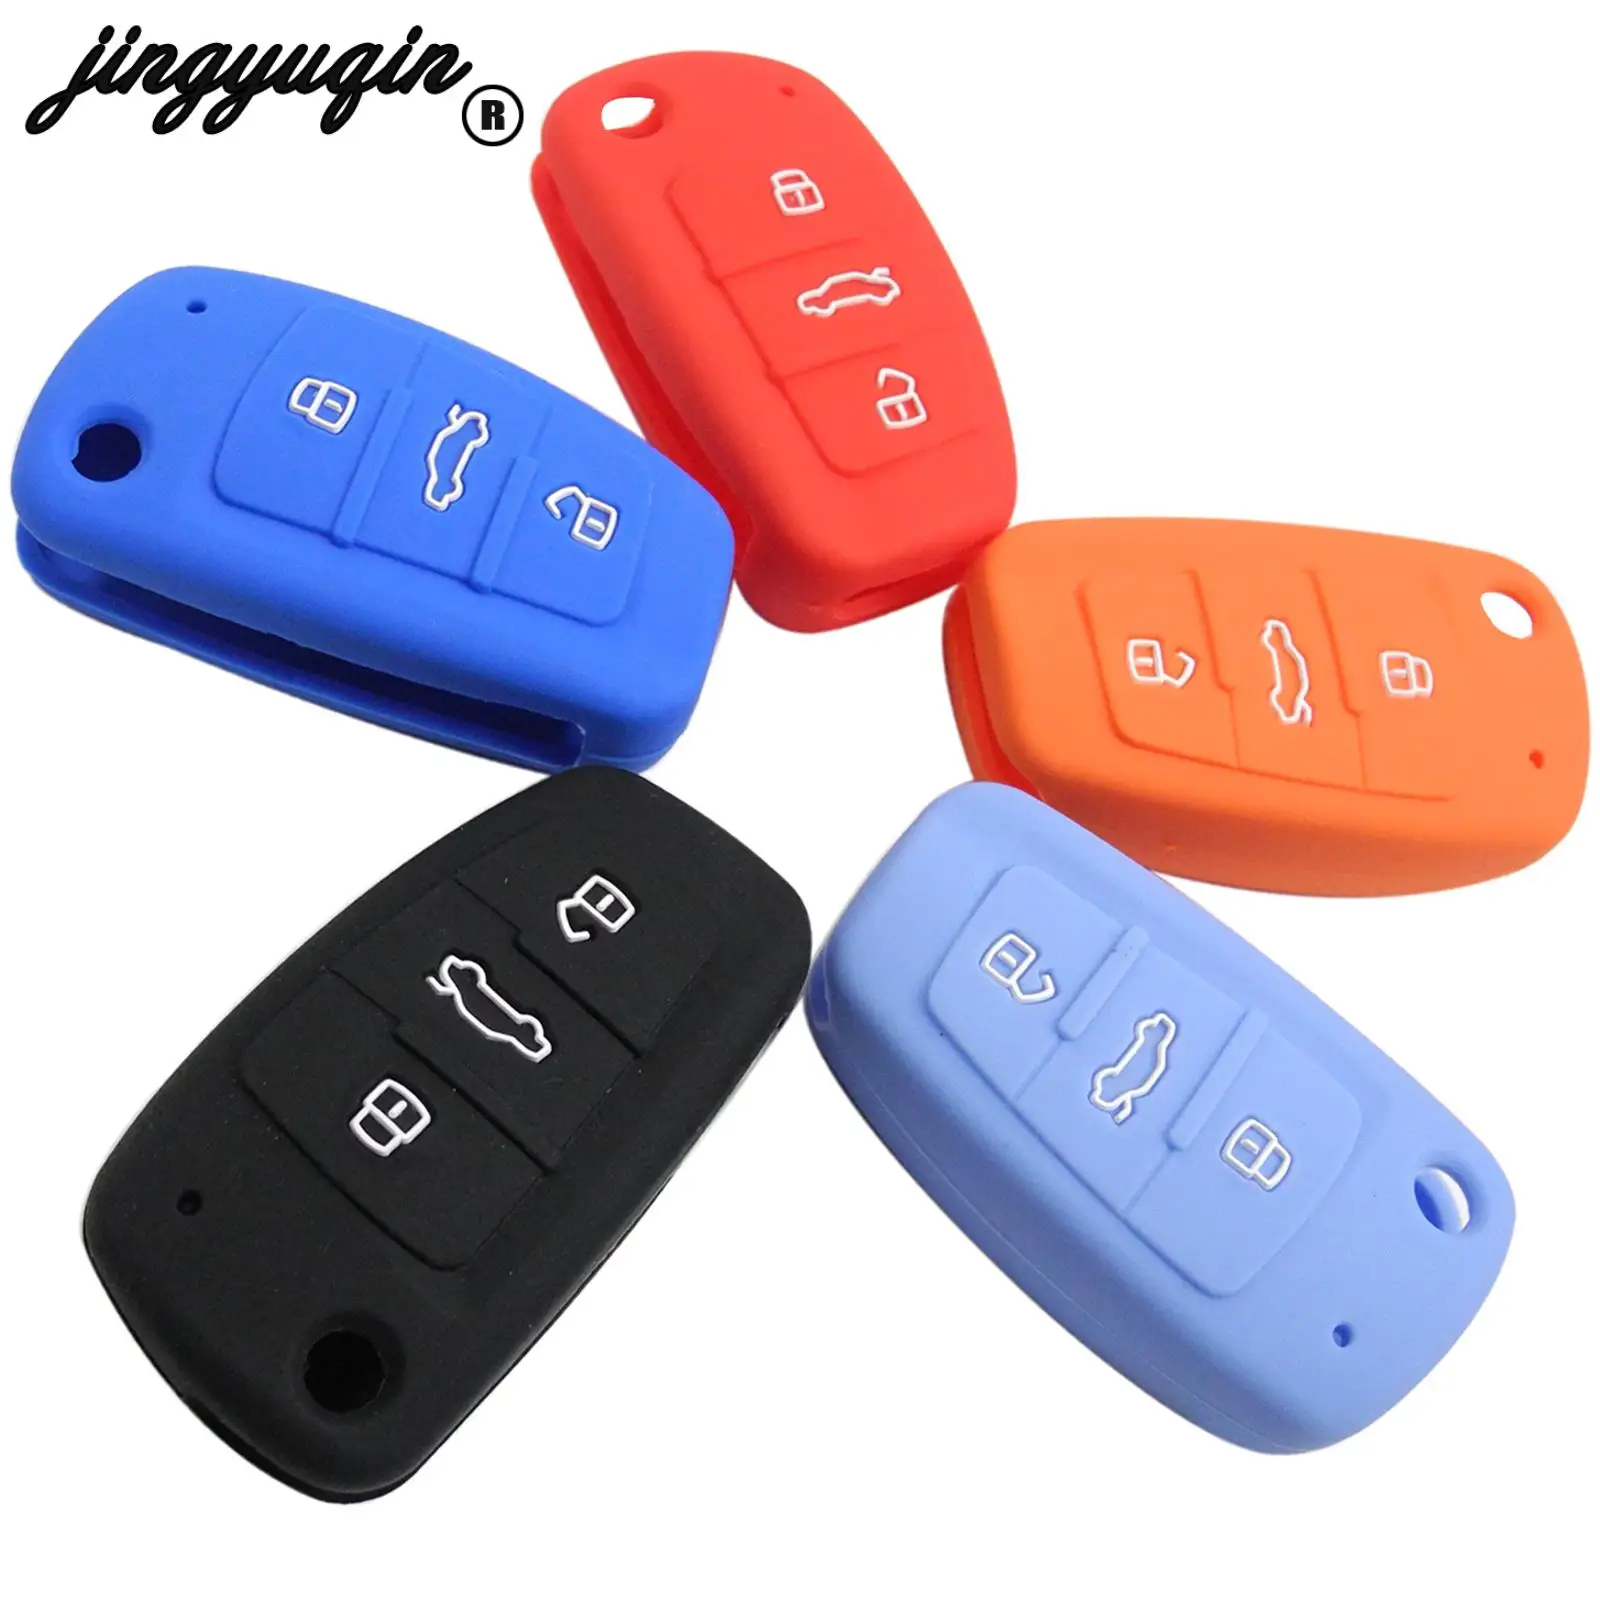 

jingyuqin 3 Buttons Silicone Key Case FOB For Audi A1 A3 Q3 Q7 R8 A6L TT Folding Key Case Car-styling